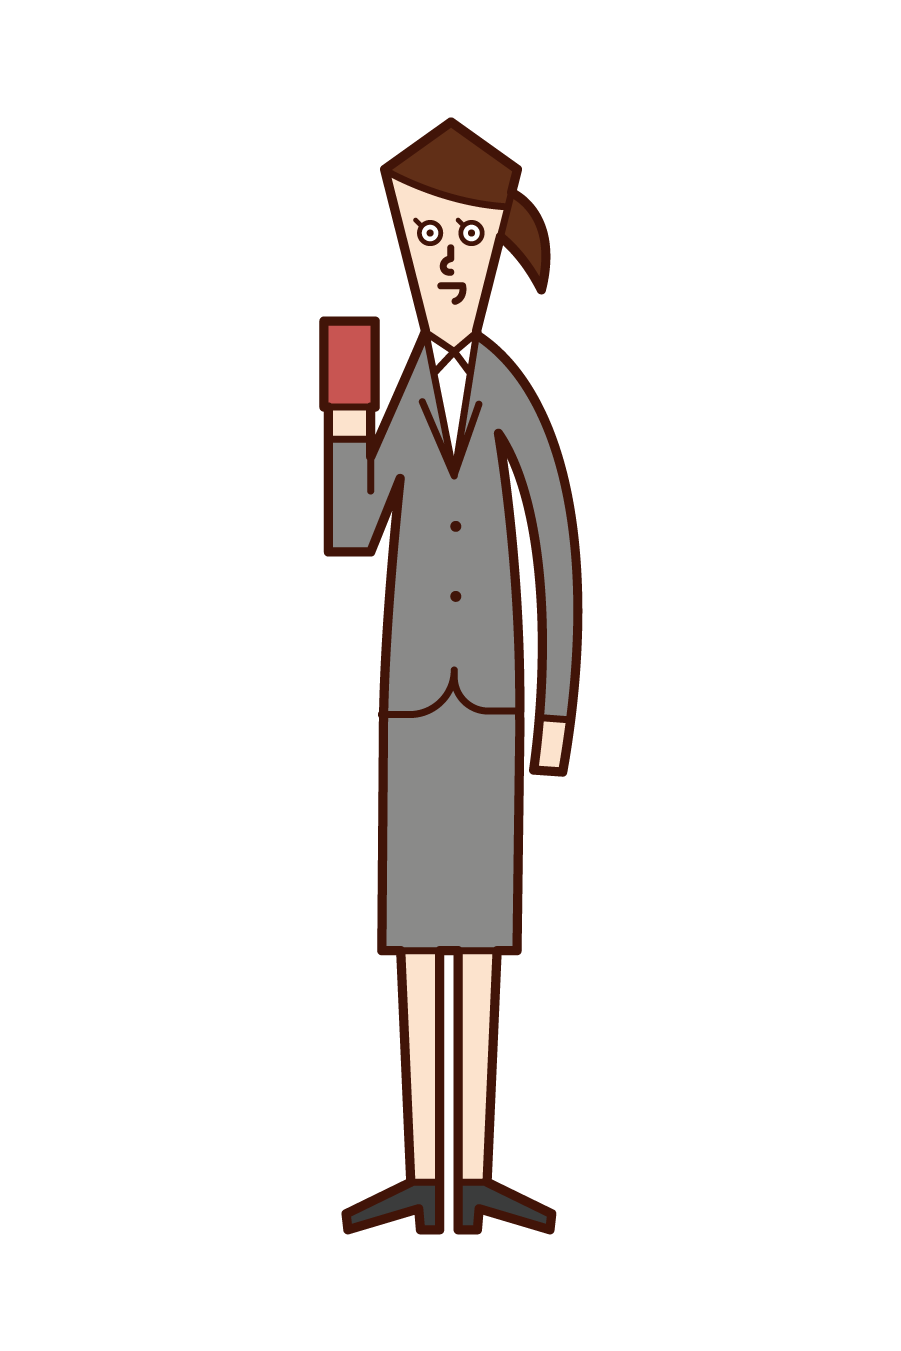 Illustration of a woman with a smartphone or card